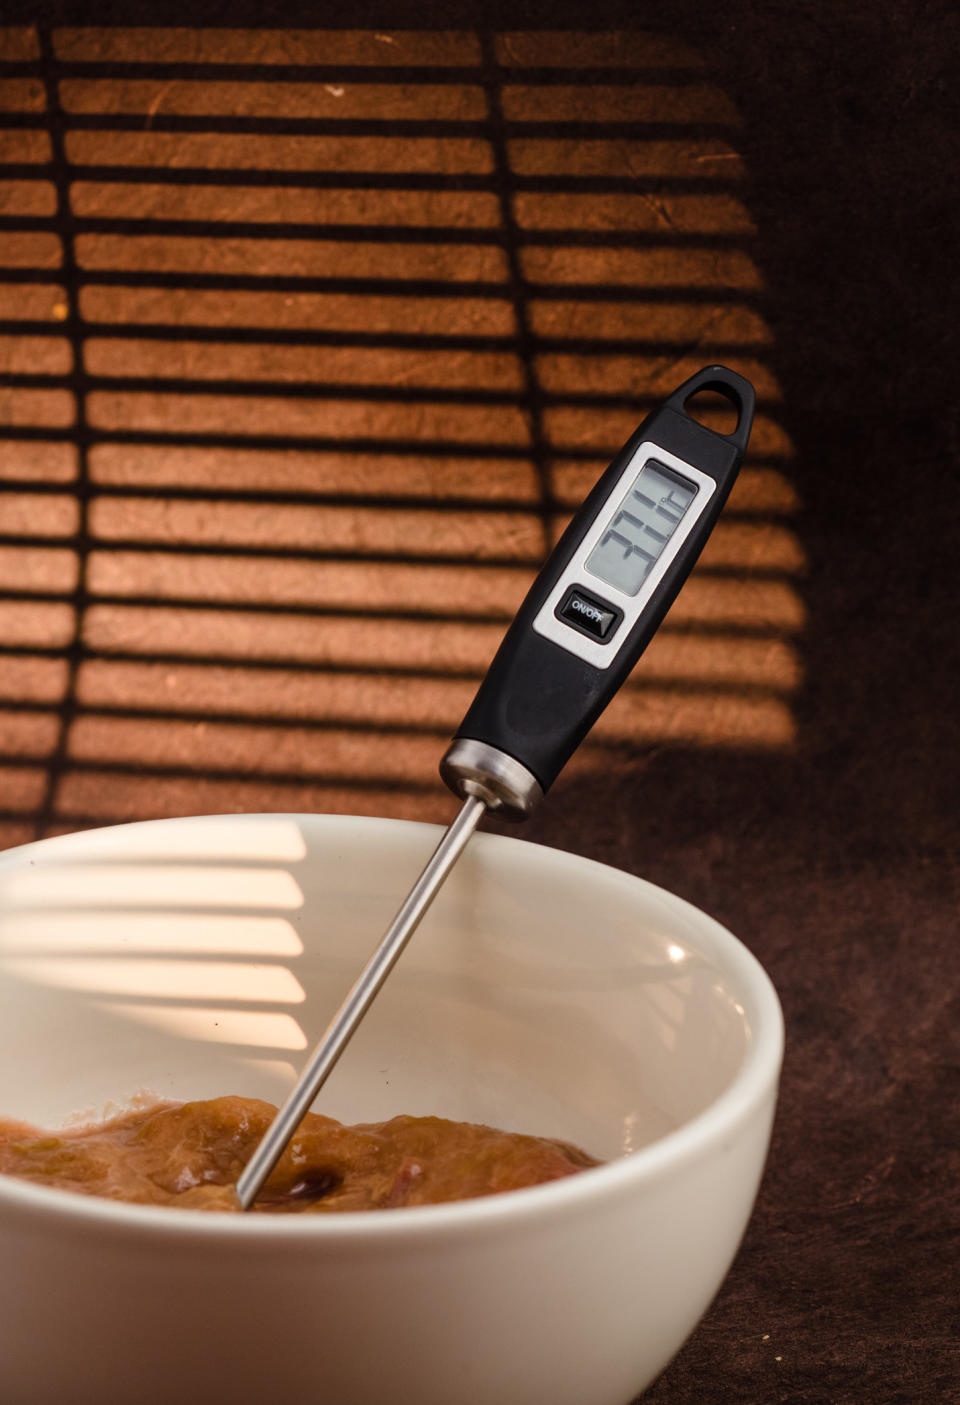 A cooking thermometer in a bowl of food